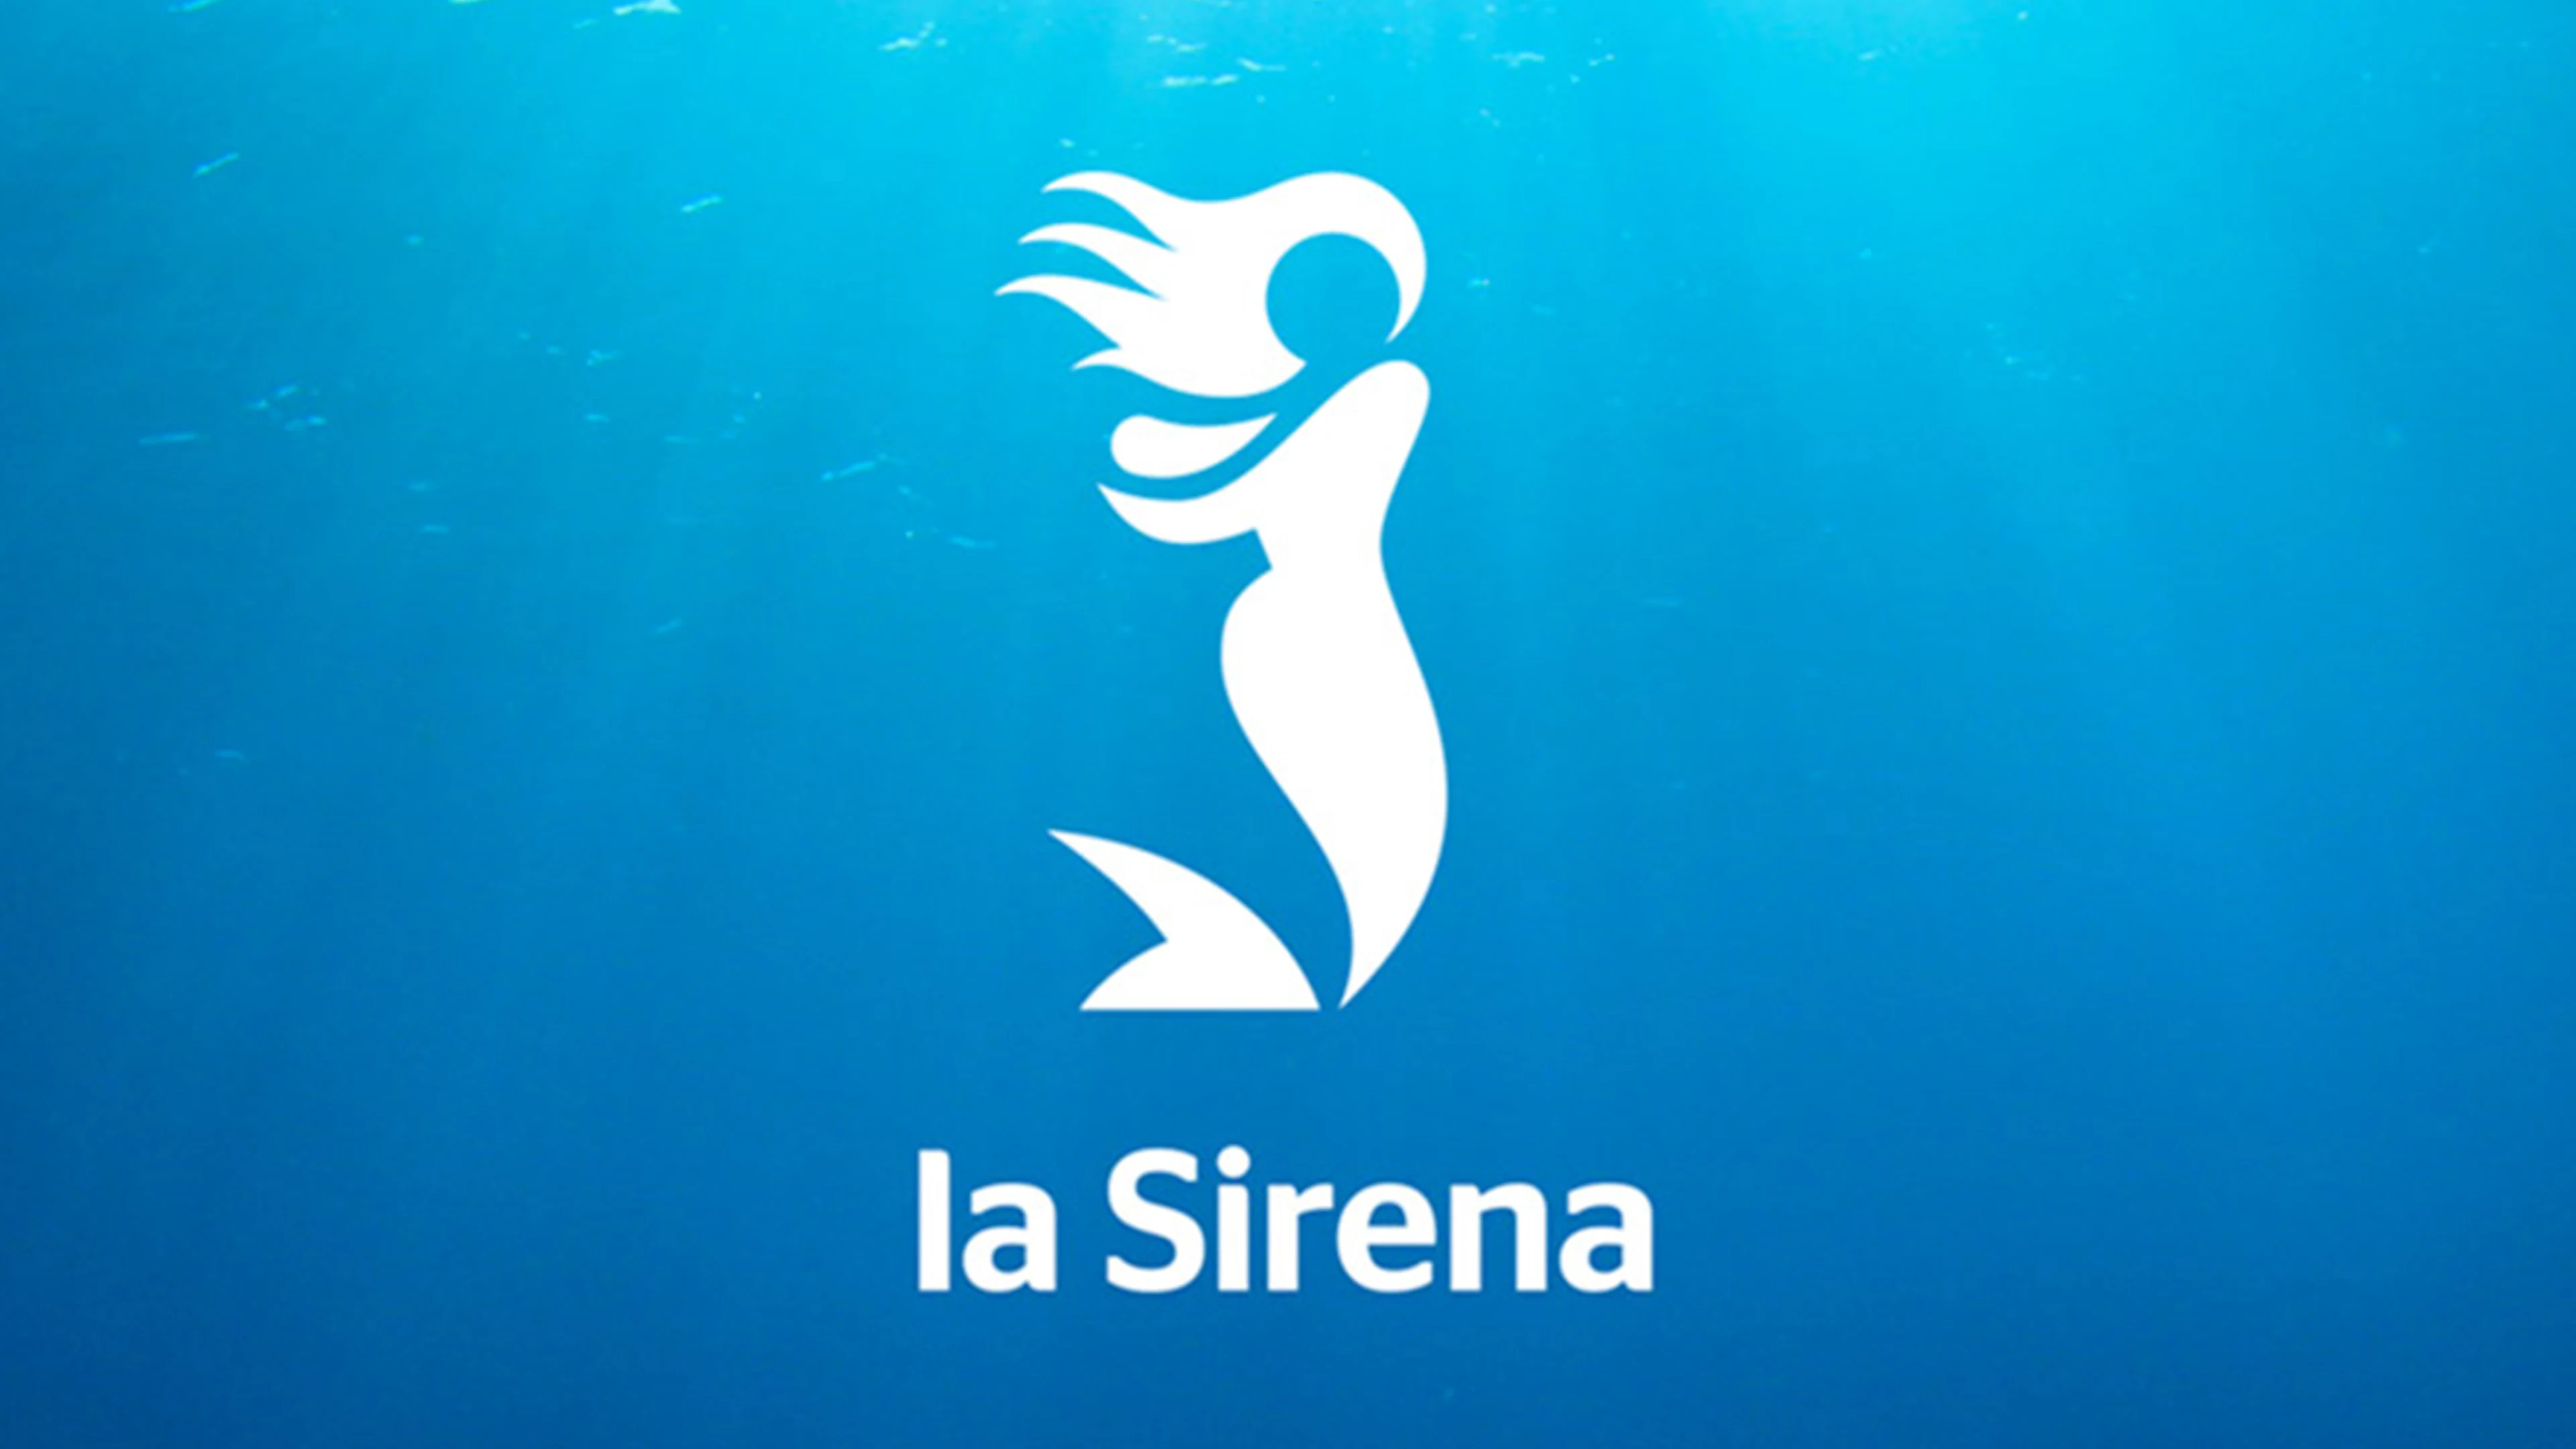 Android Apps by La Sirena on Google Play